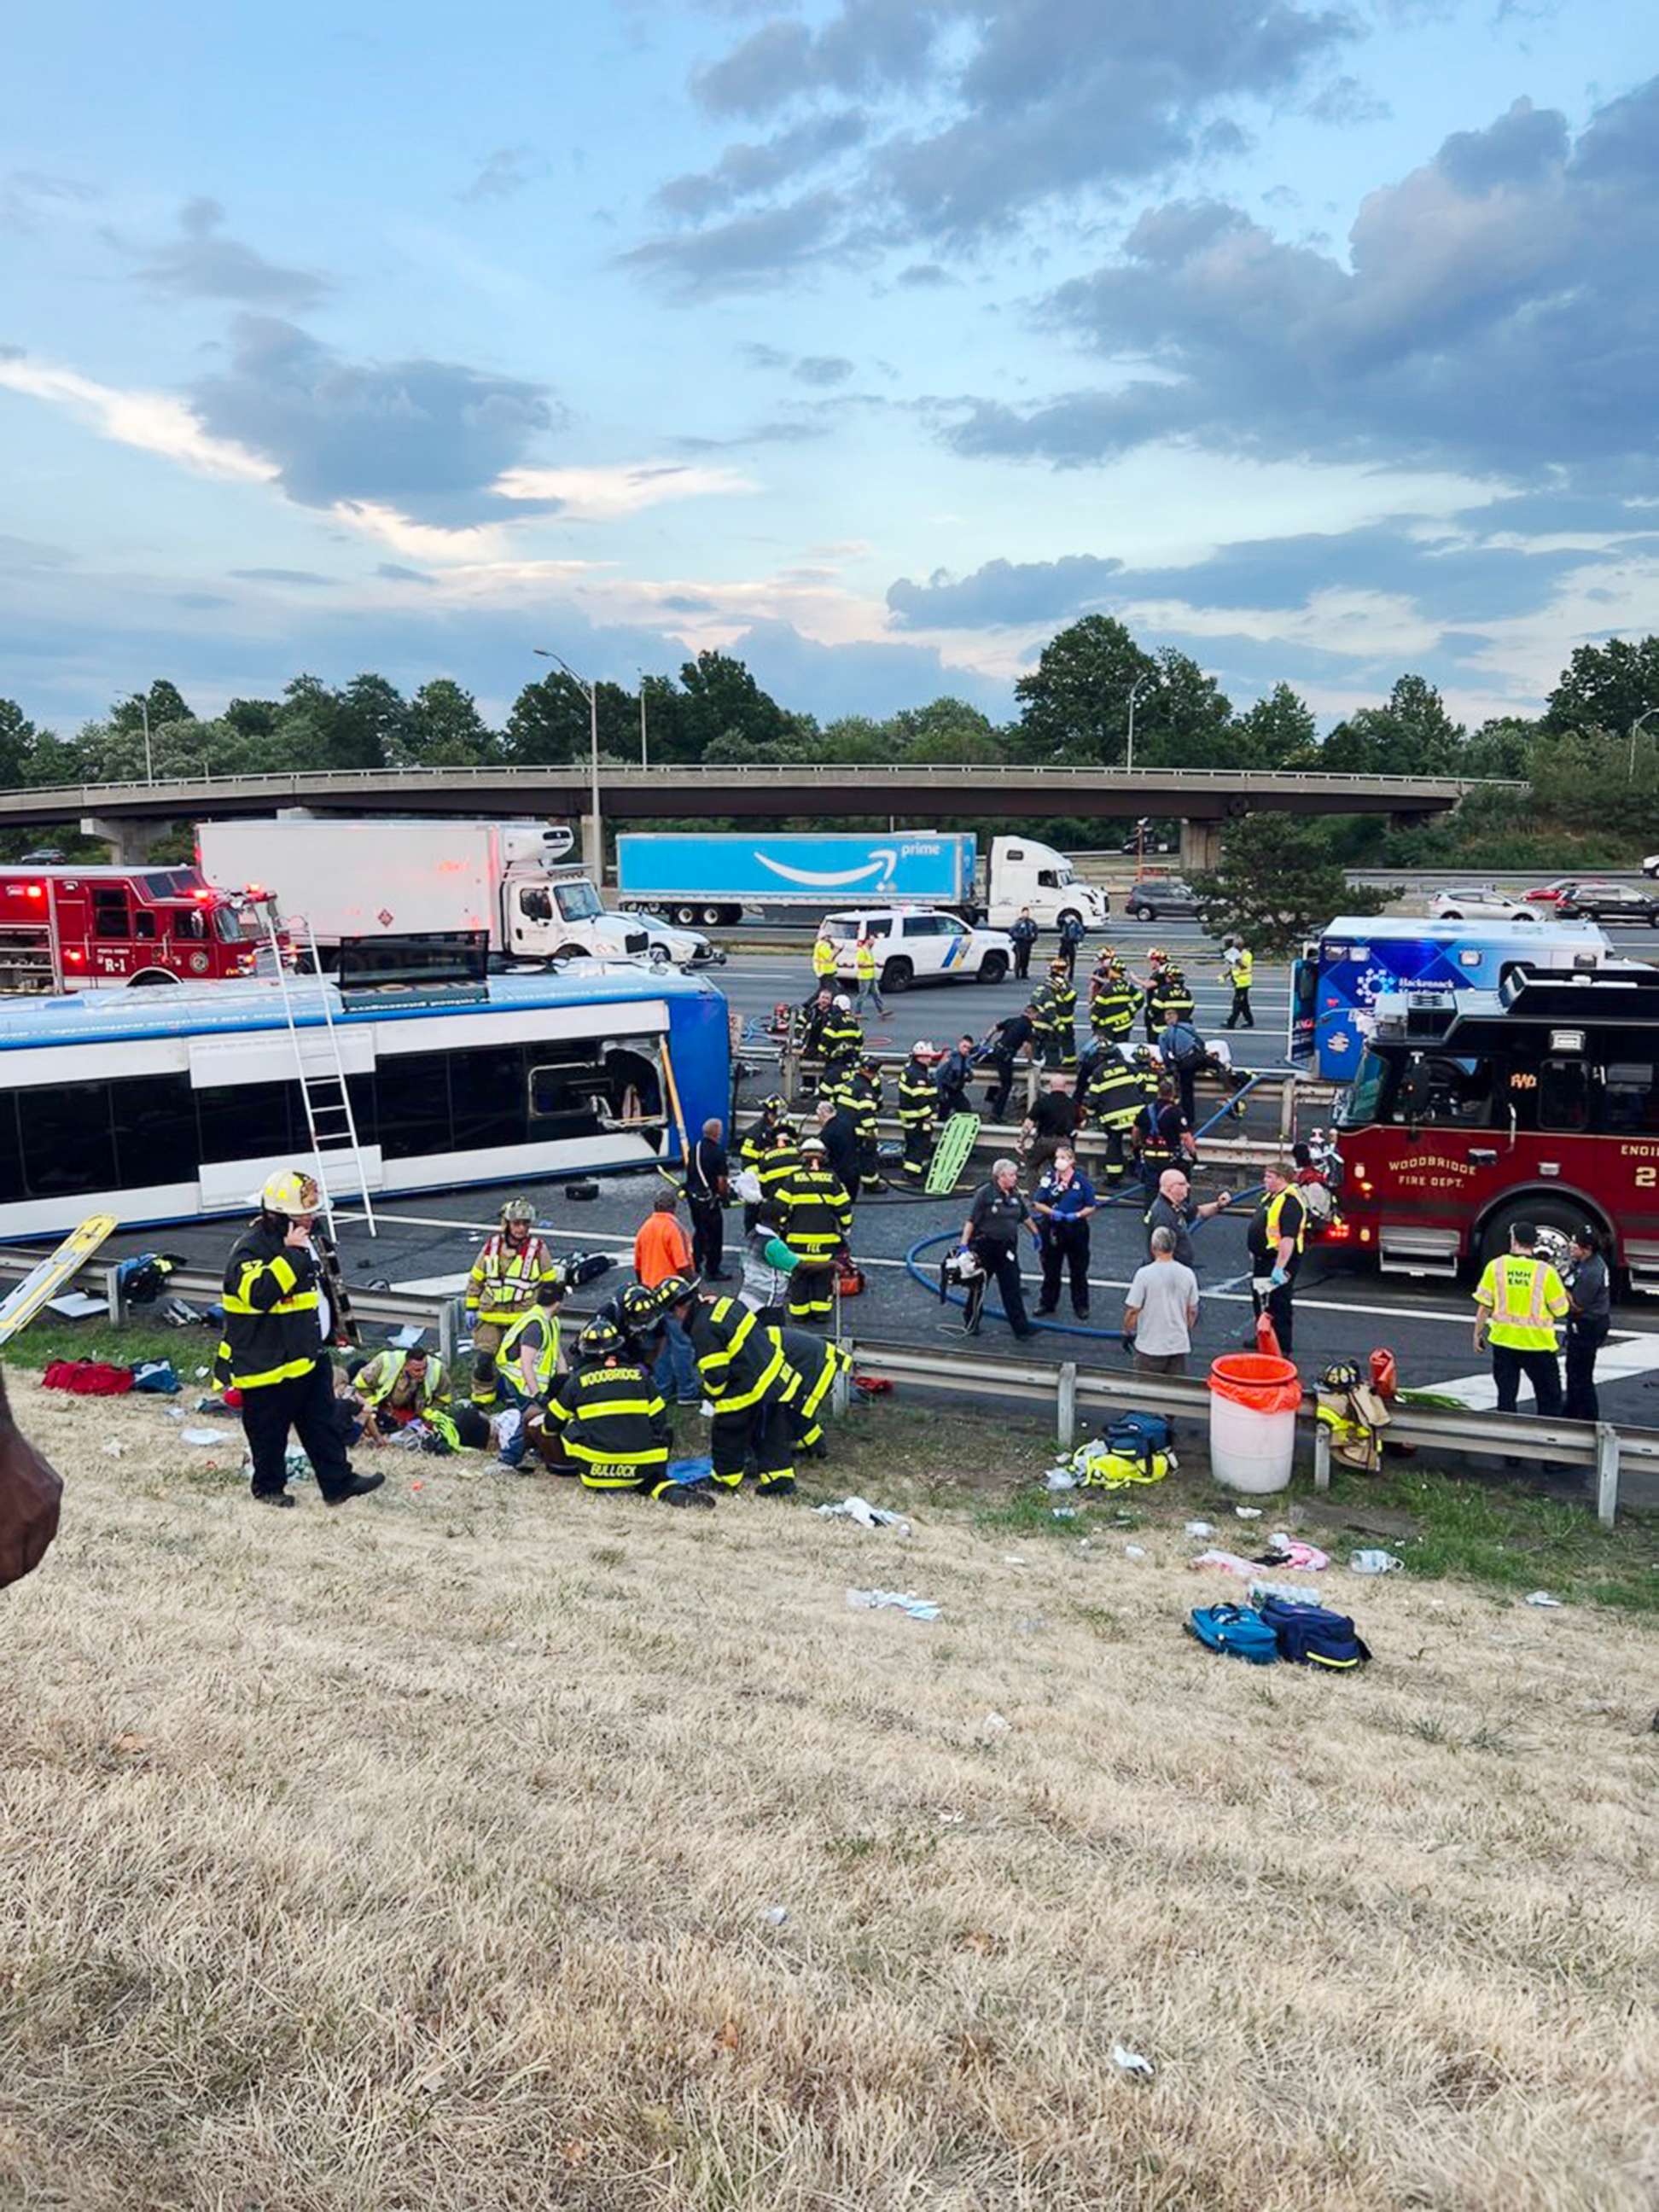 PHOTO: Emergency responders attend to the scene of a bus accident on the Turnpike in Woodbridge, N.J., Aug. 9, 2022.